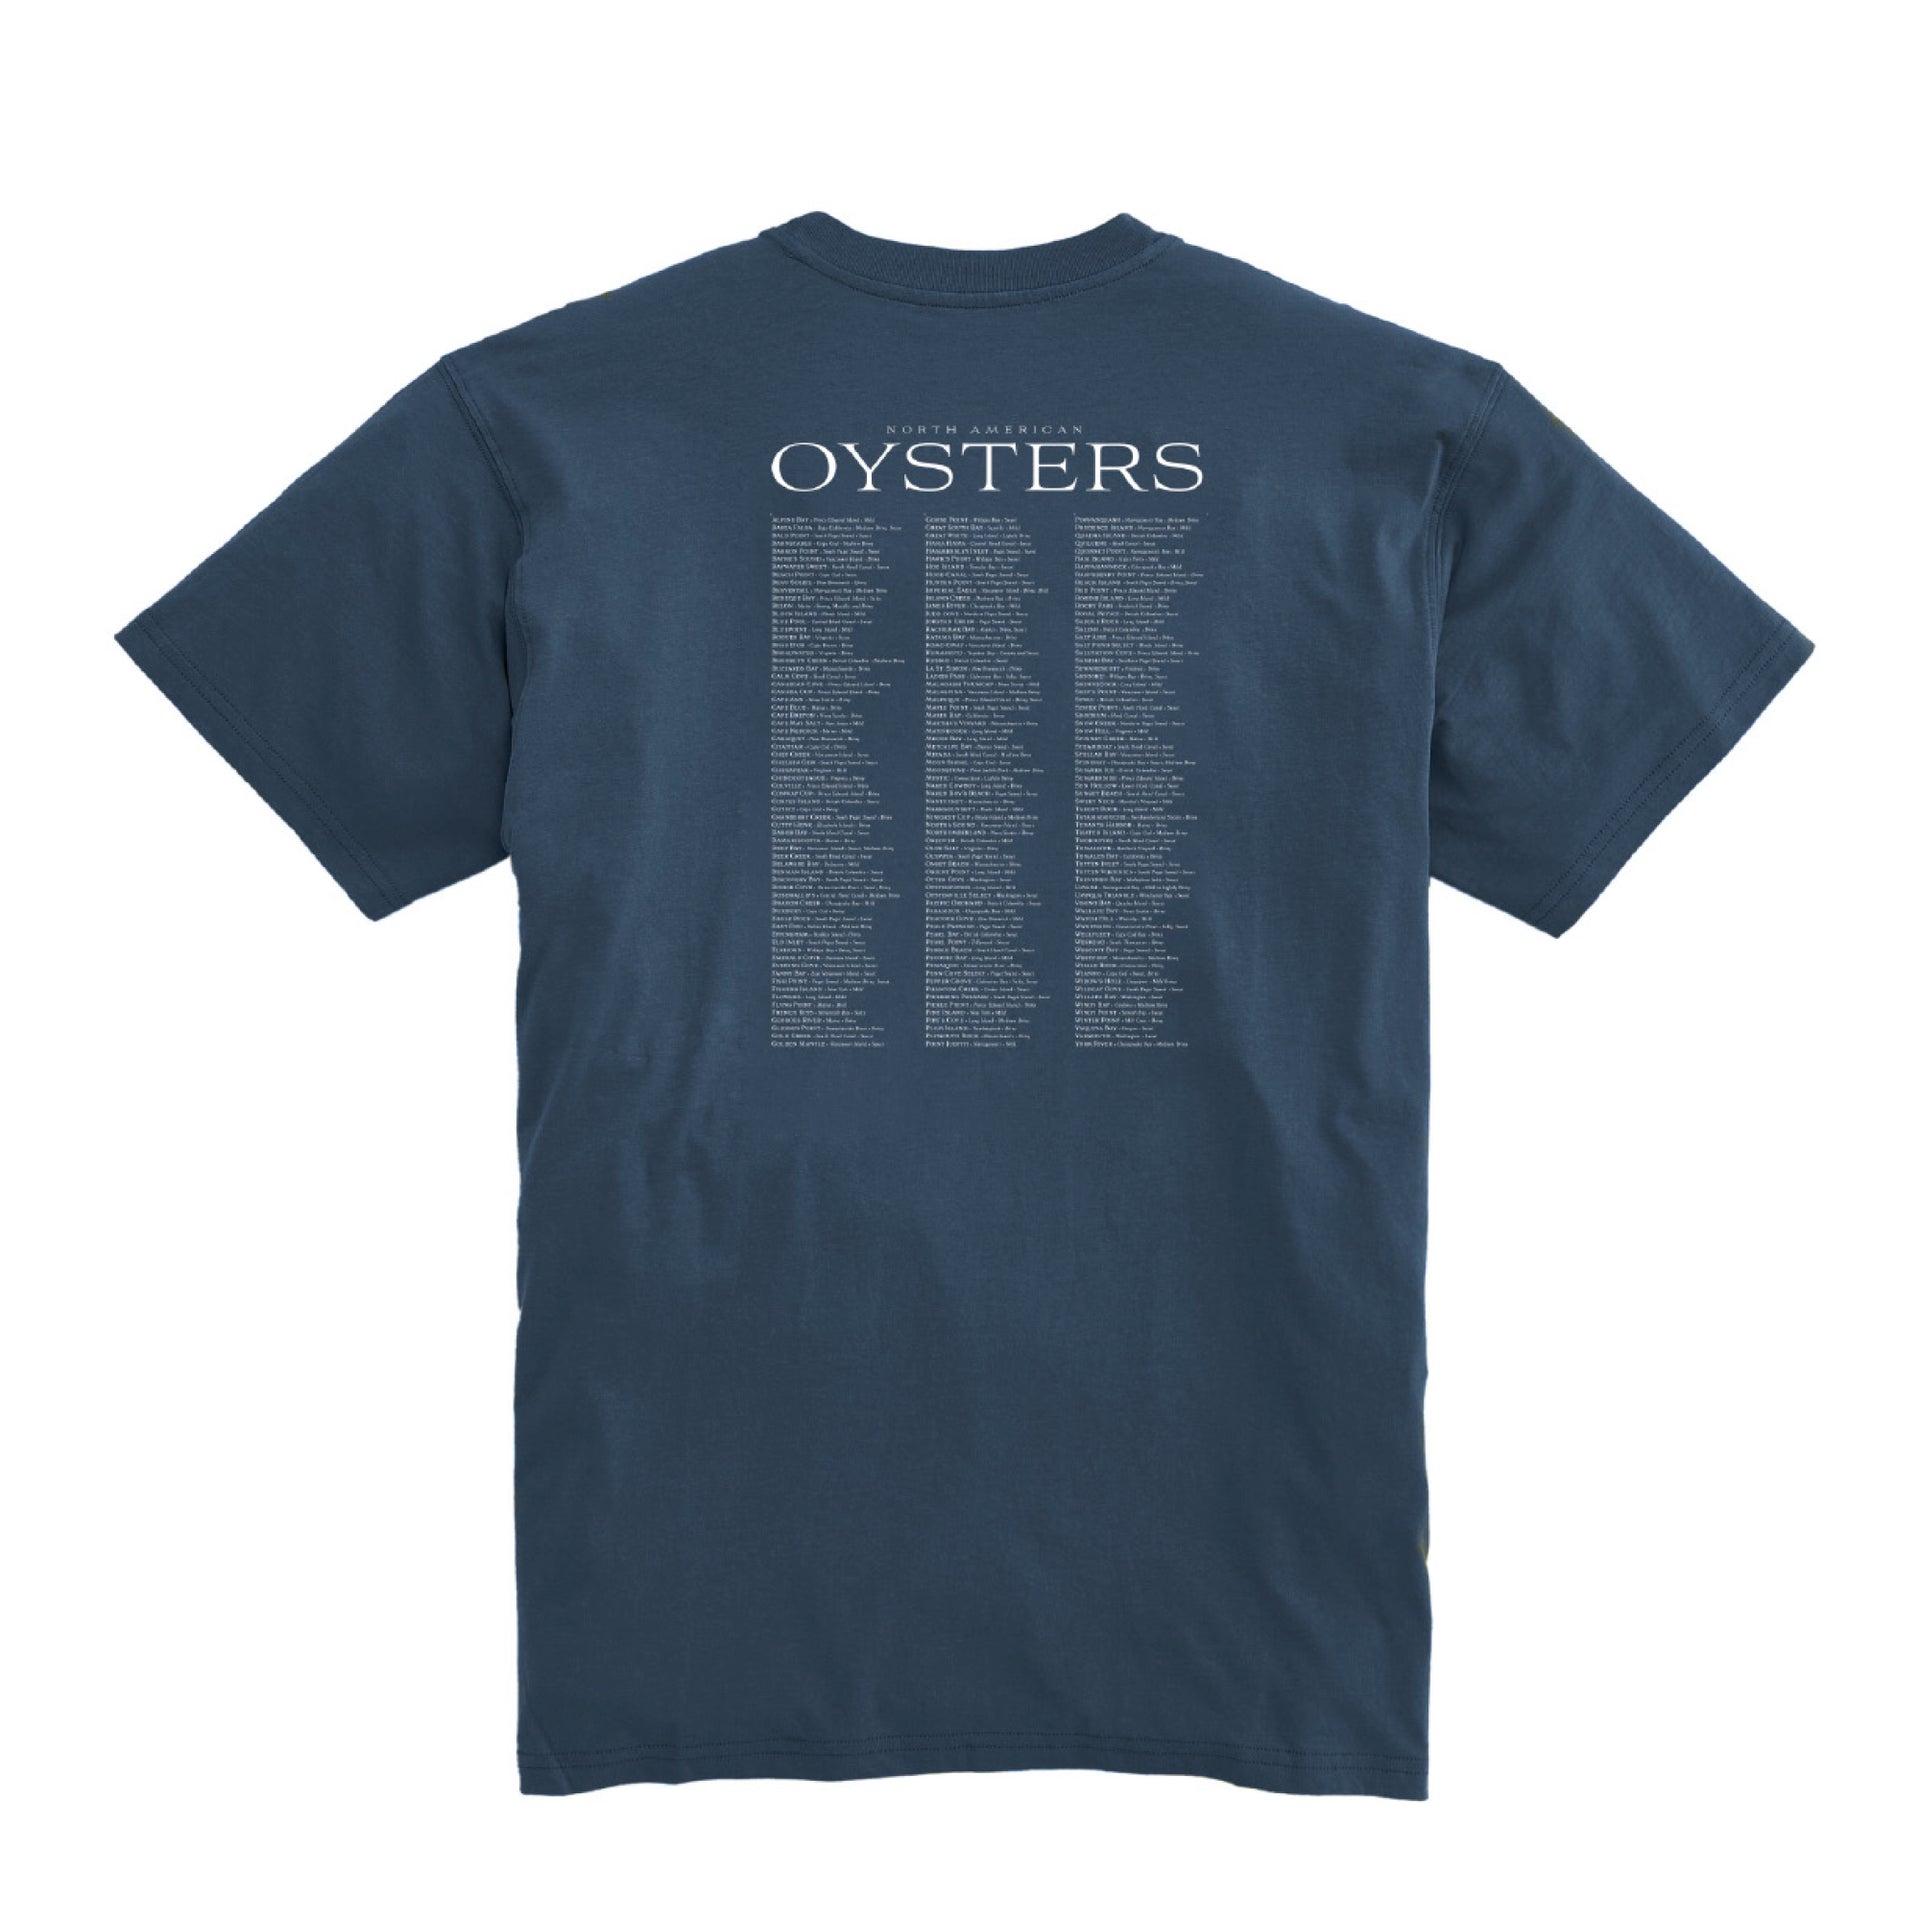 New Oyster Tees and Island Tees From Onward Reserve! Great Easter Gift for  that hard to get for Man!